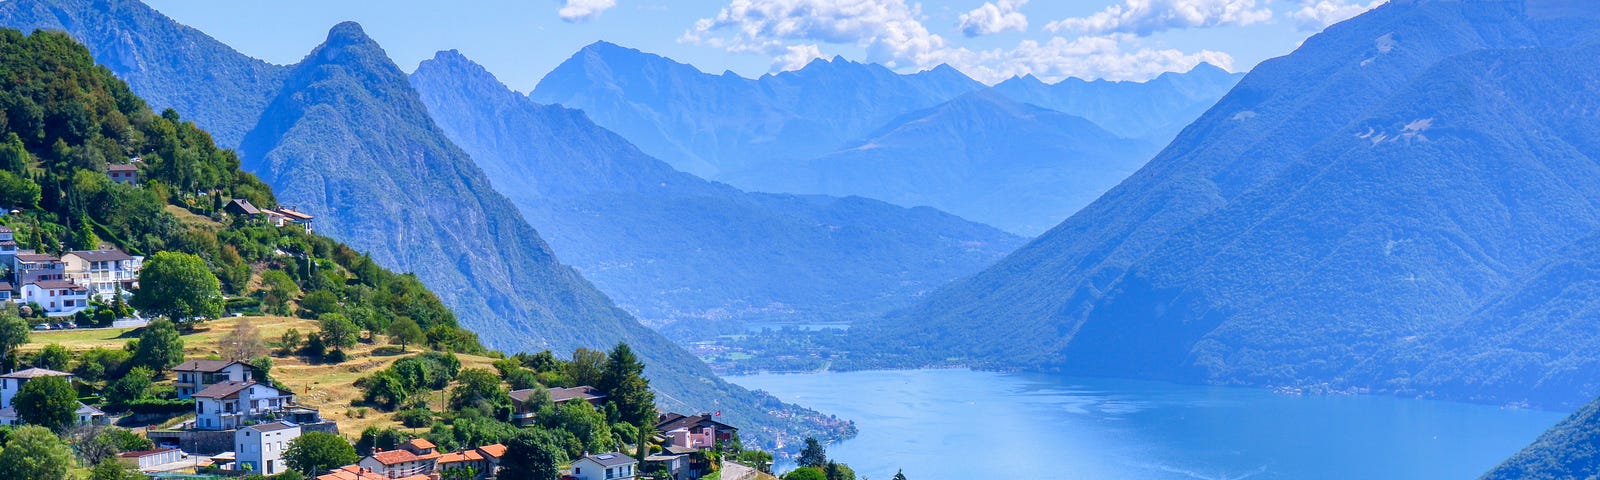 A view of a Swiss village on Lake Lugano with mountains in the background, the setting for this story